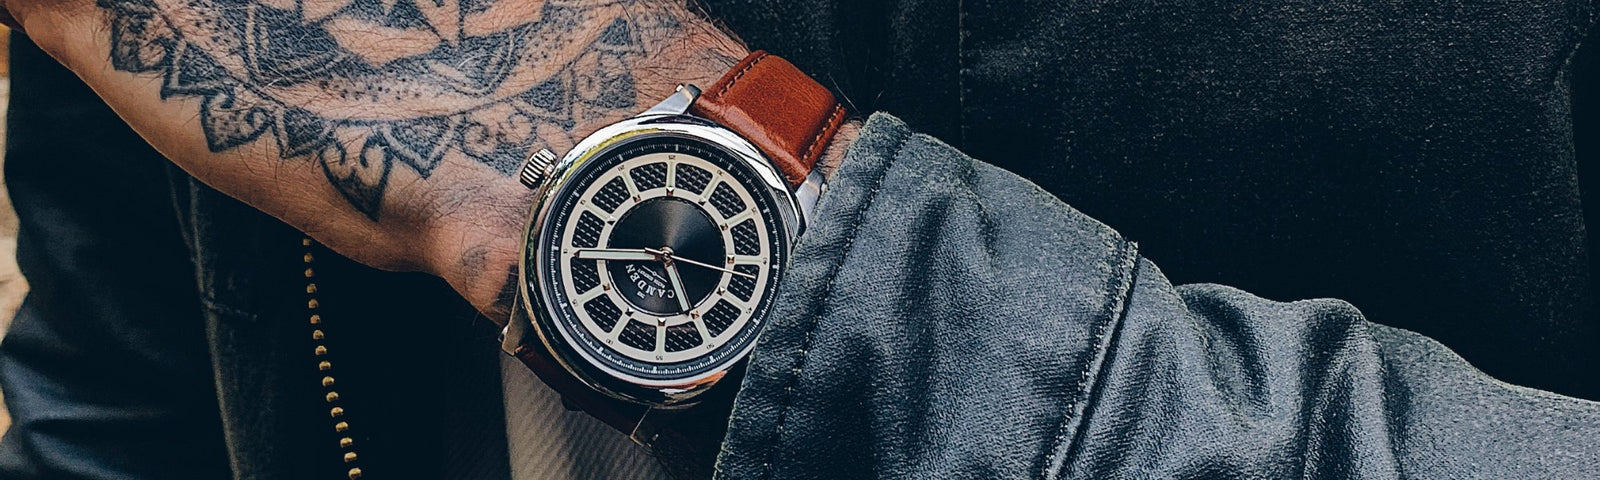 Best Of 2019 - Our Top 5 High-End Complicated Watches / Buying Guide